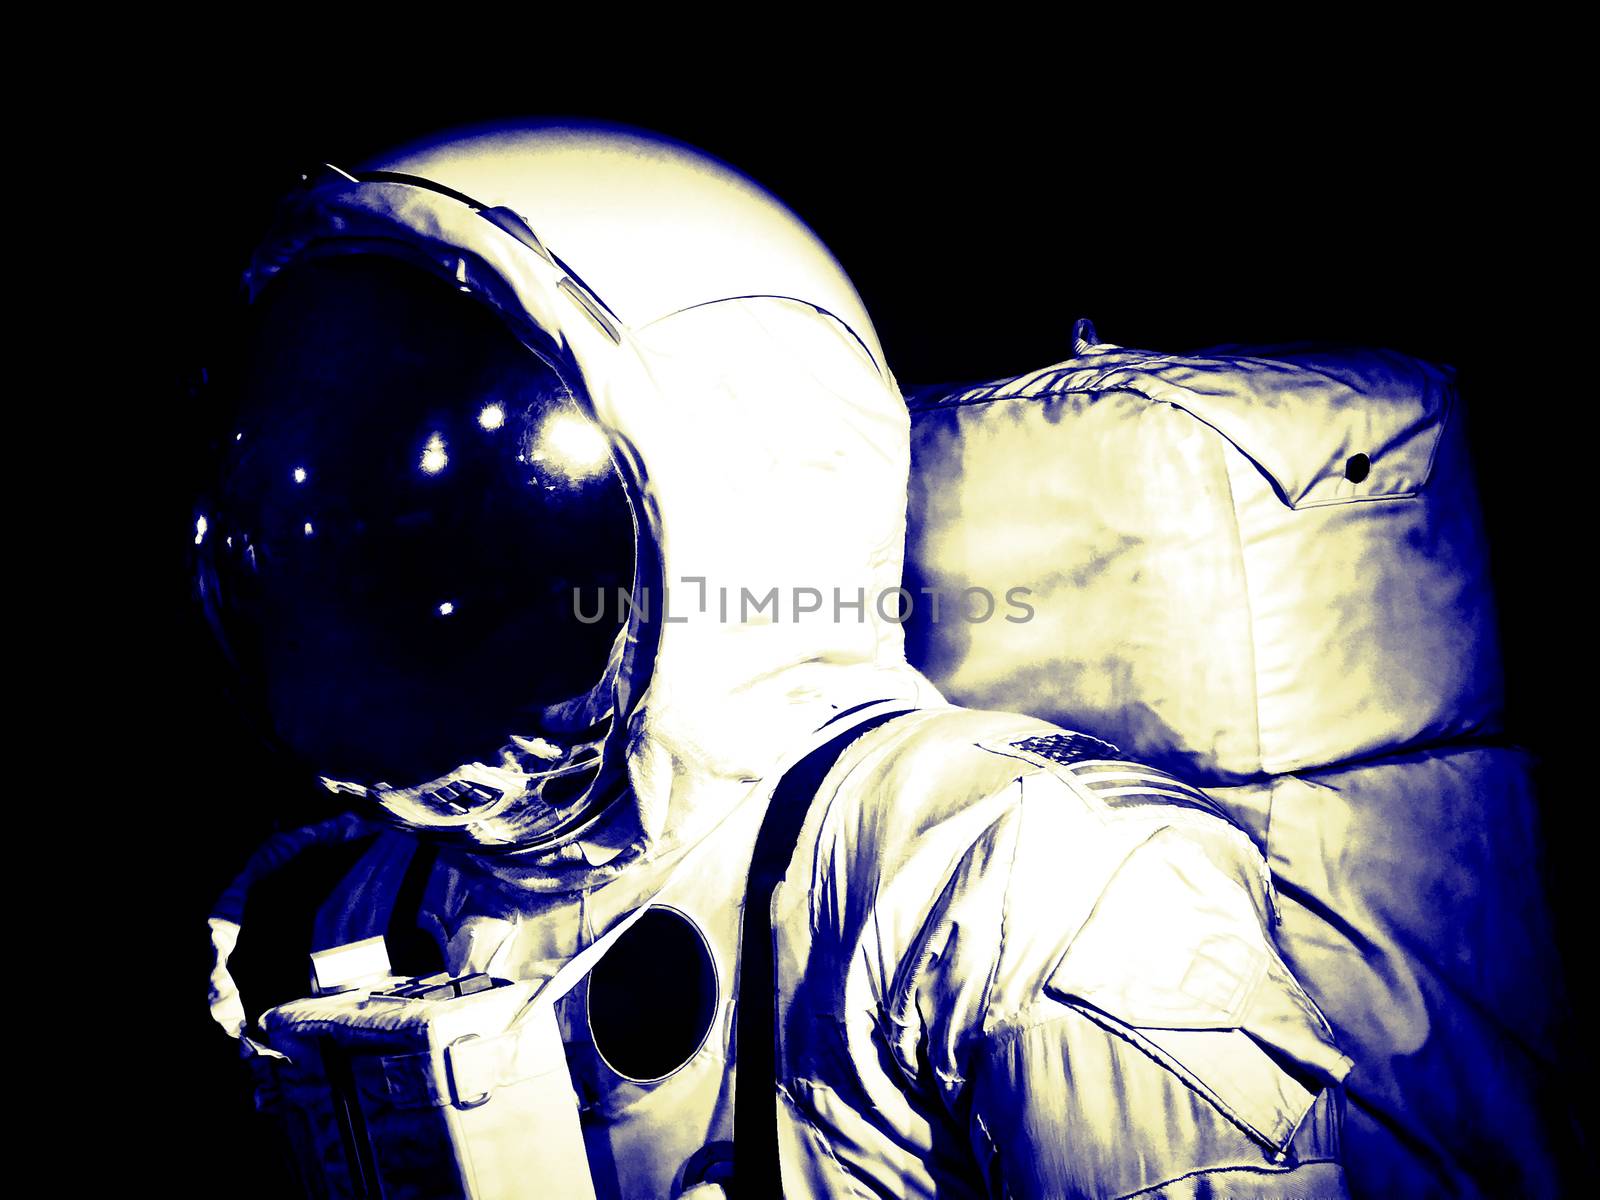 Astronaut spaceman spacesuit costume similar to those used in a space walk and the moon landing black and white toned image stock photo